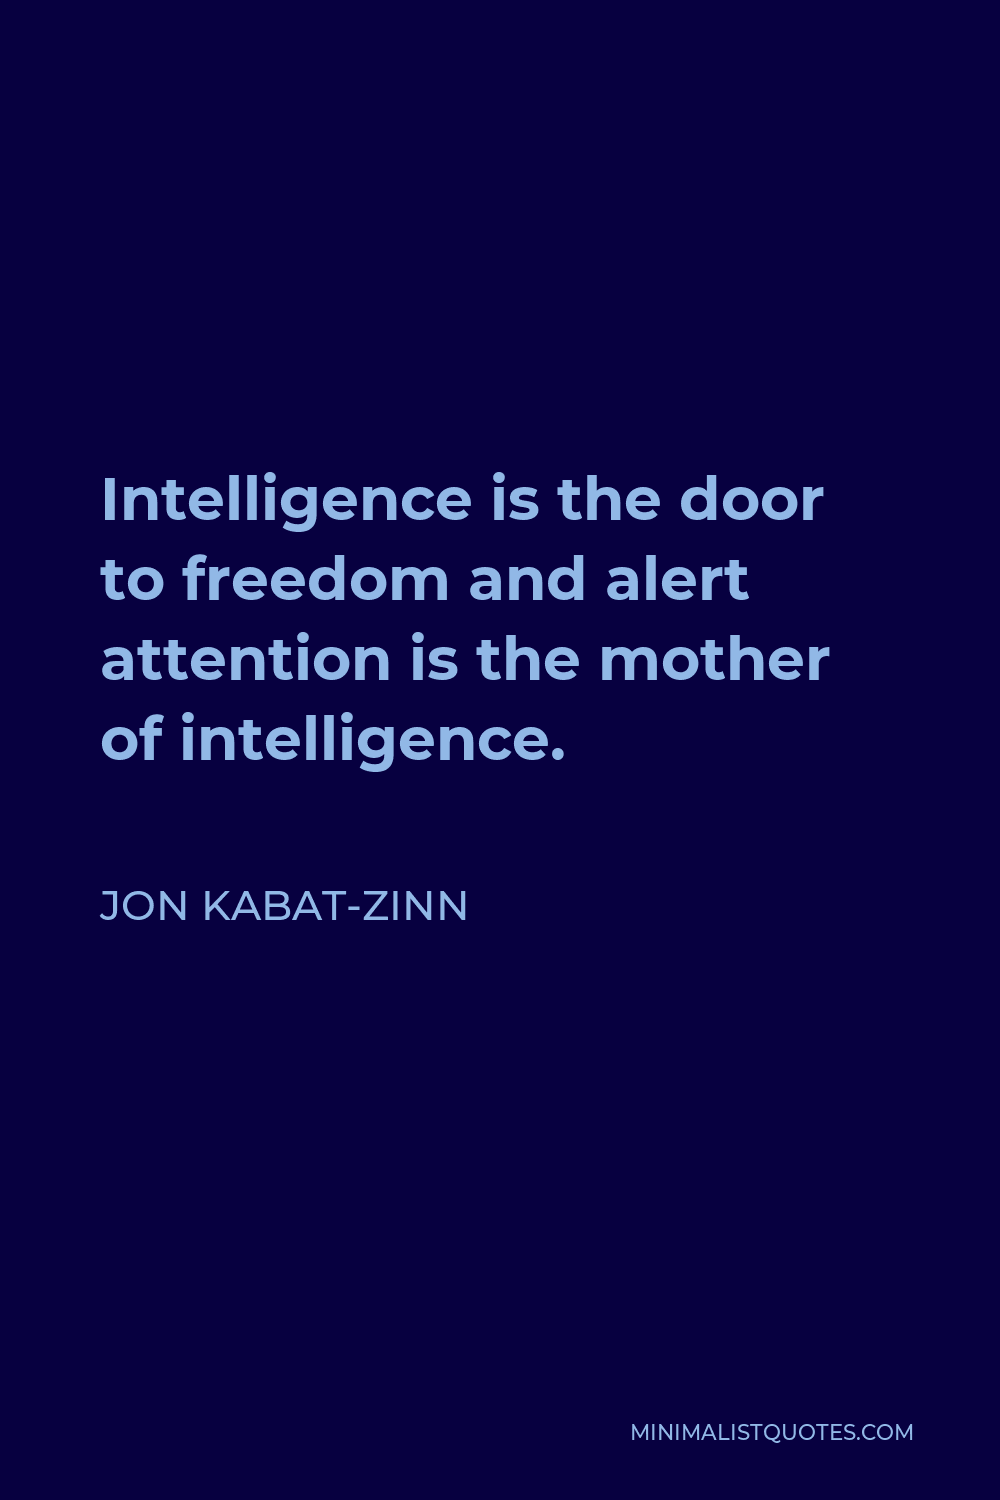 Jon Kabat-Zinn Quote - Intelligence is the door to freedom and alert attention is the mother of intelligence.